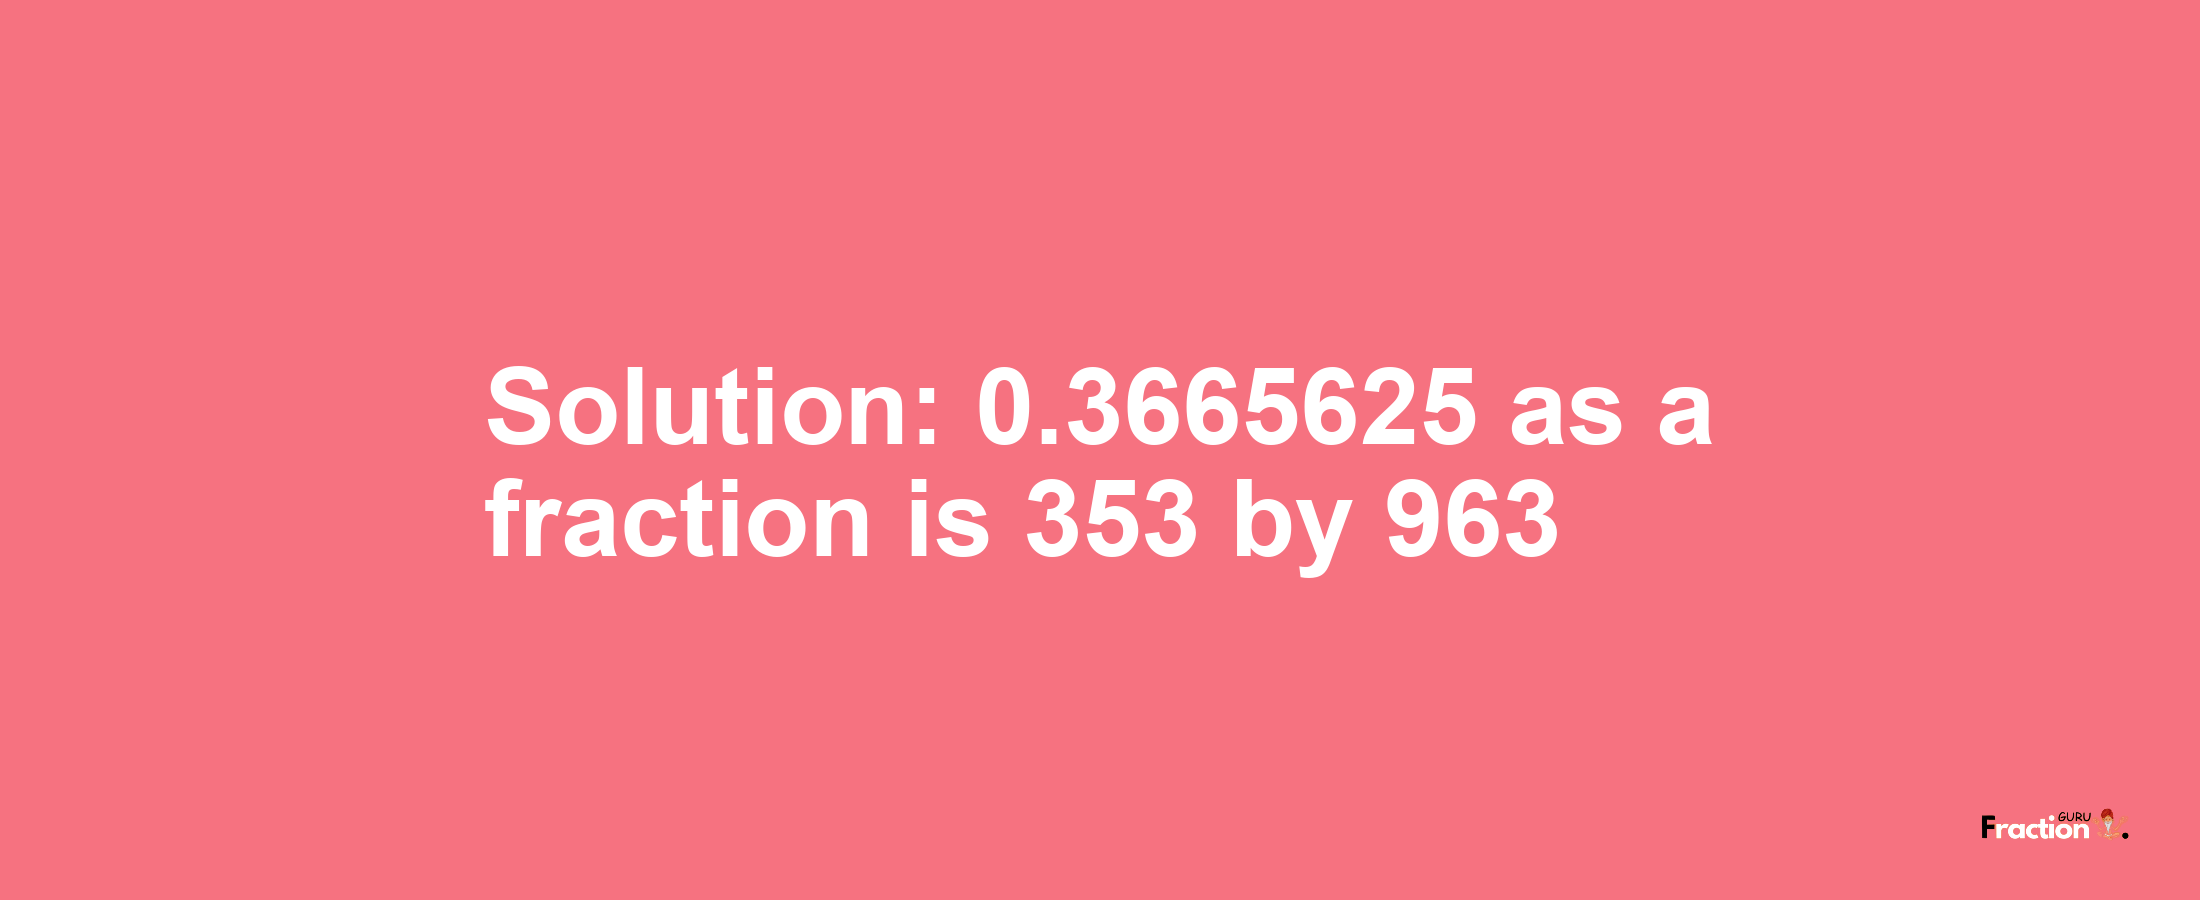 Solution:0.3665625 as a fraction is 353/963